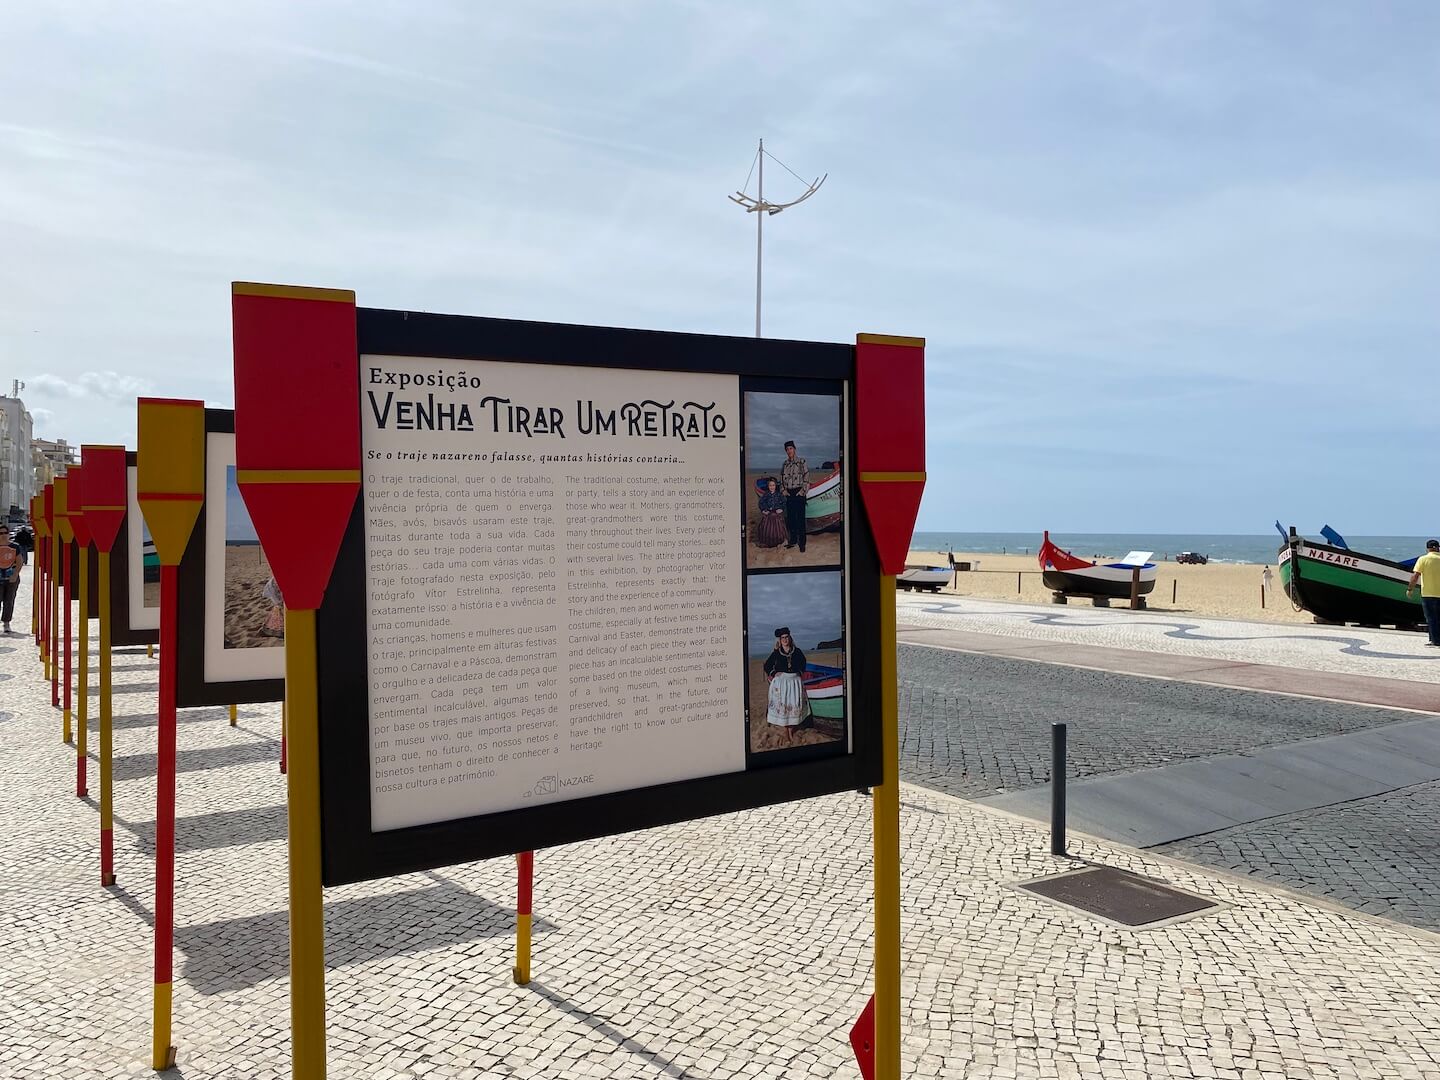 Learning about Nazaré's fishing history